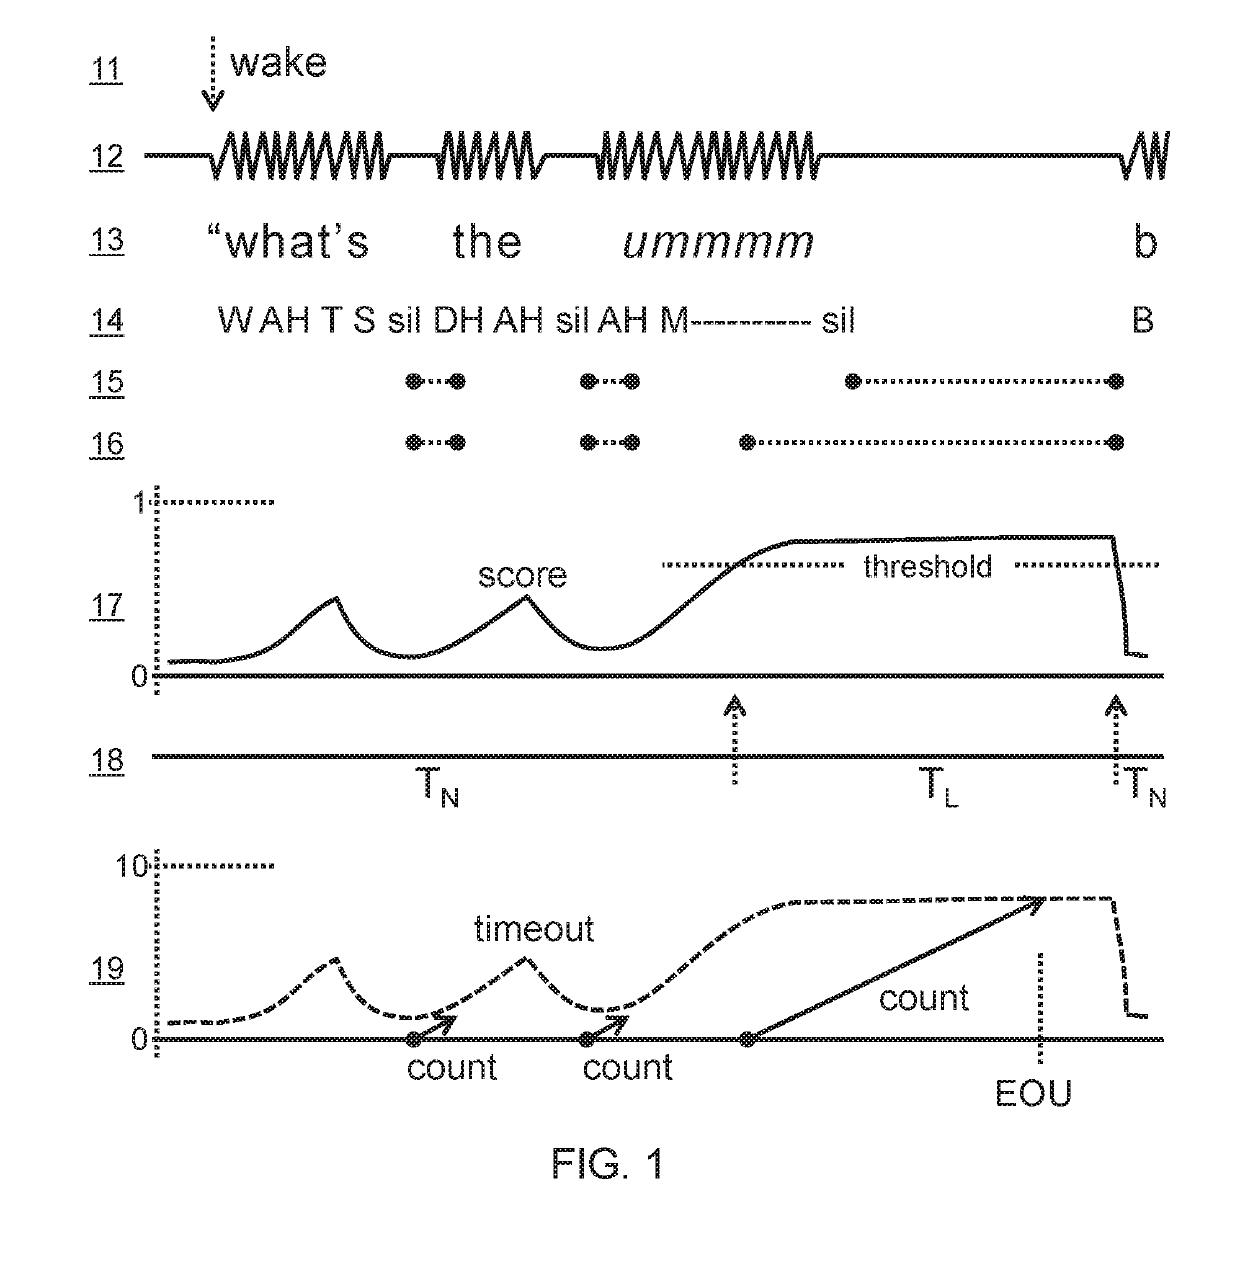 Adaptive end-of-utterance timeout for real-time speech recognition